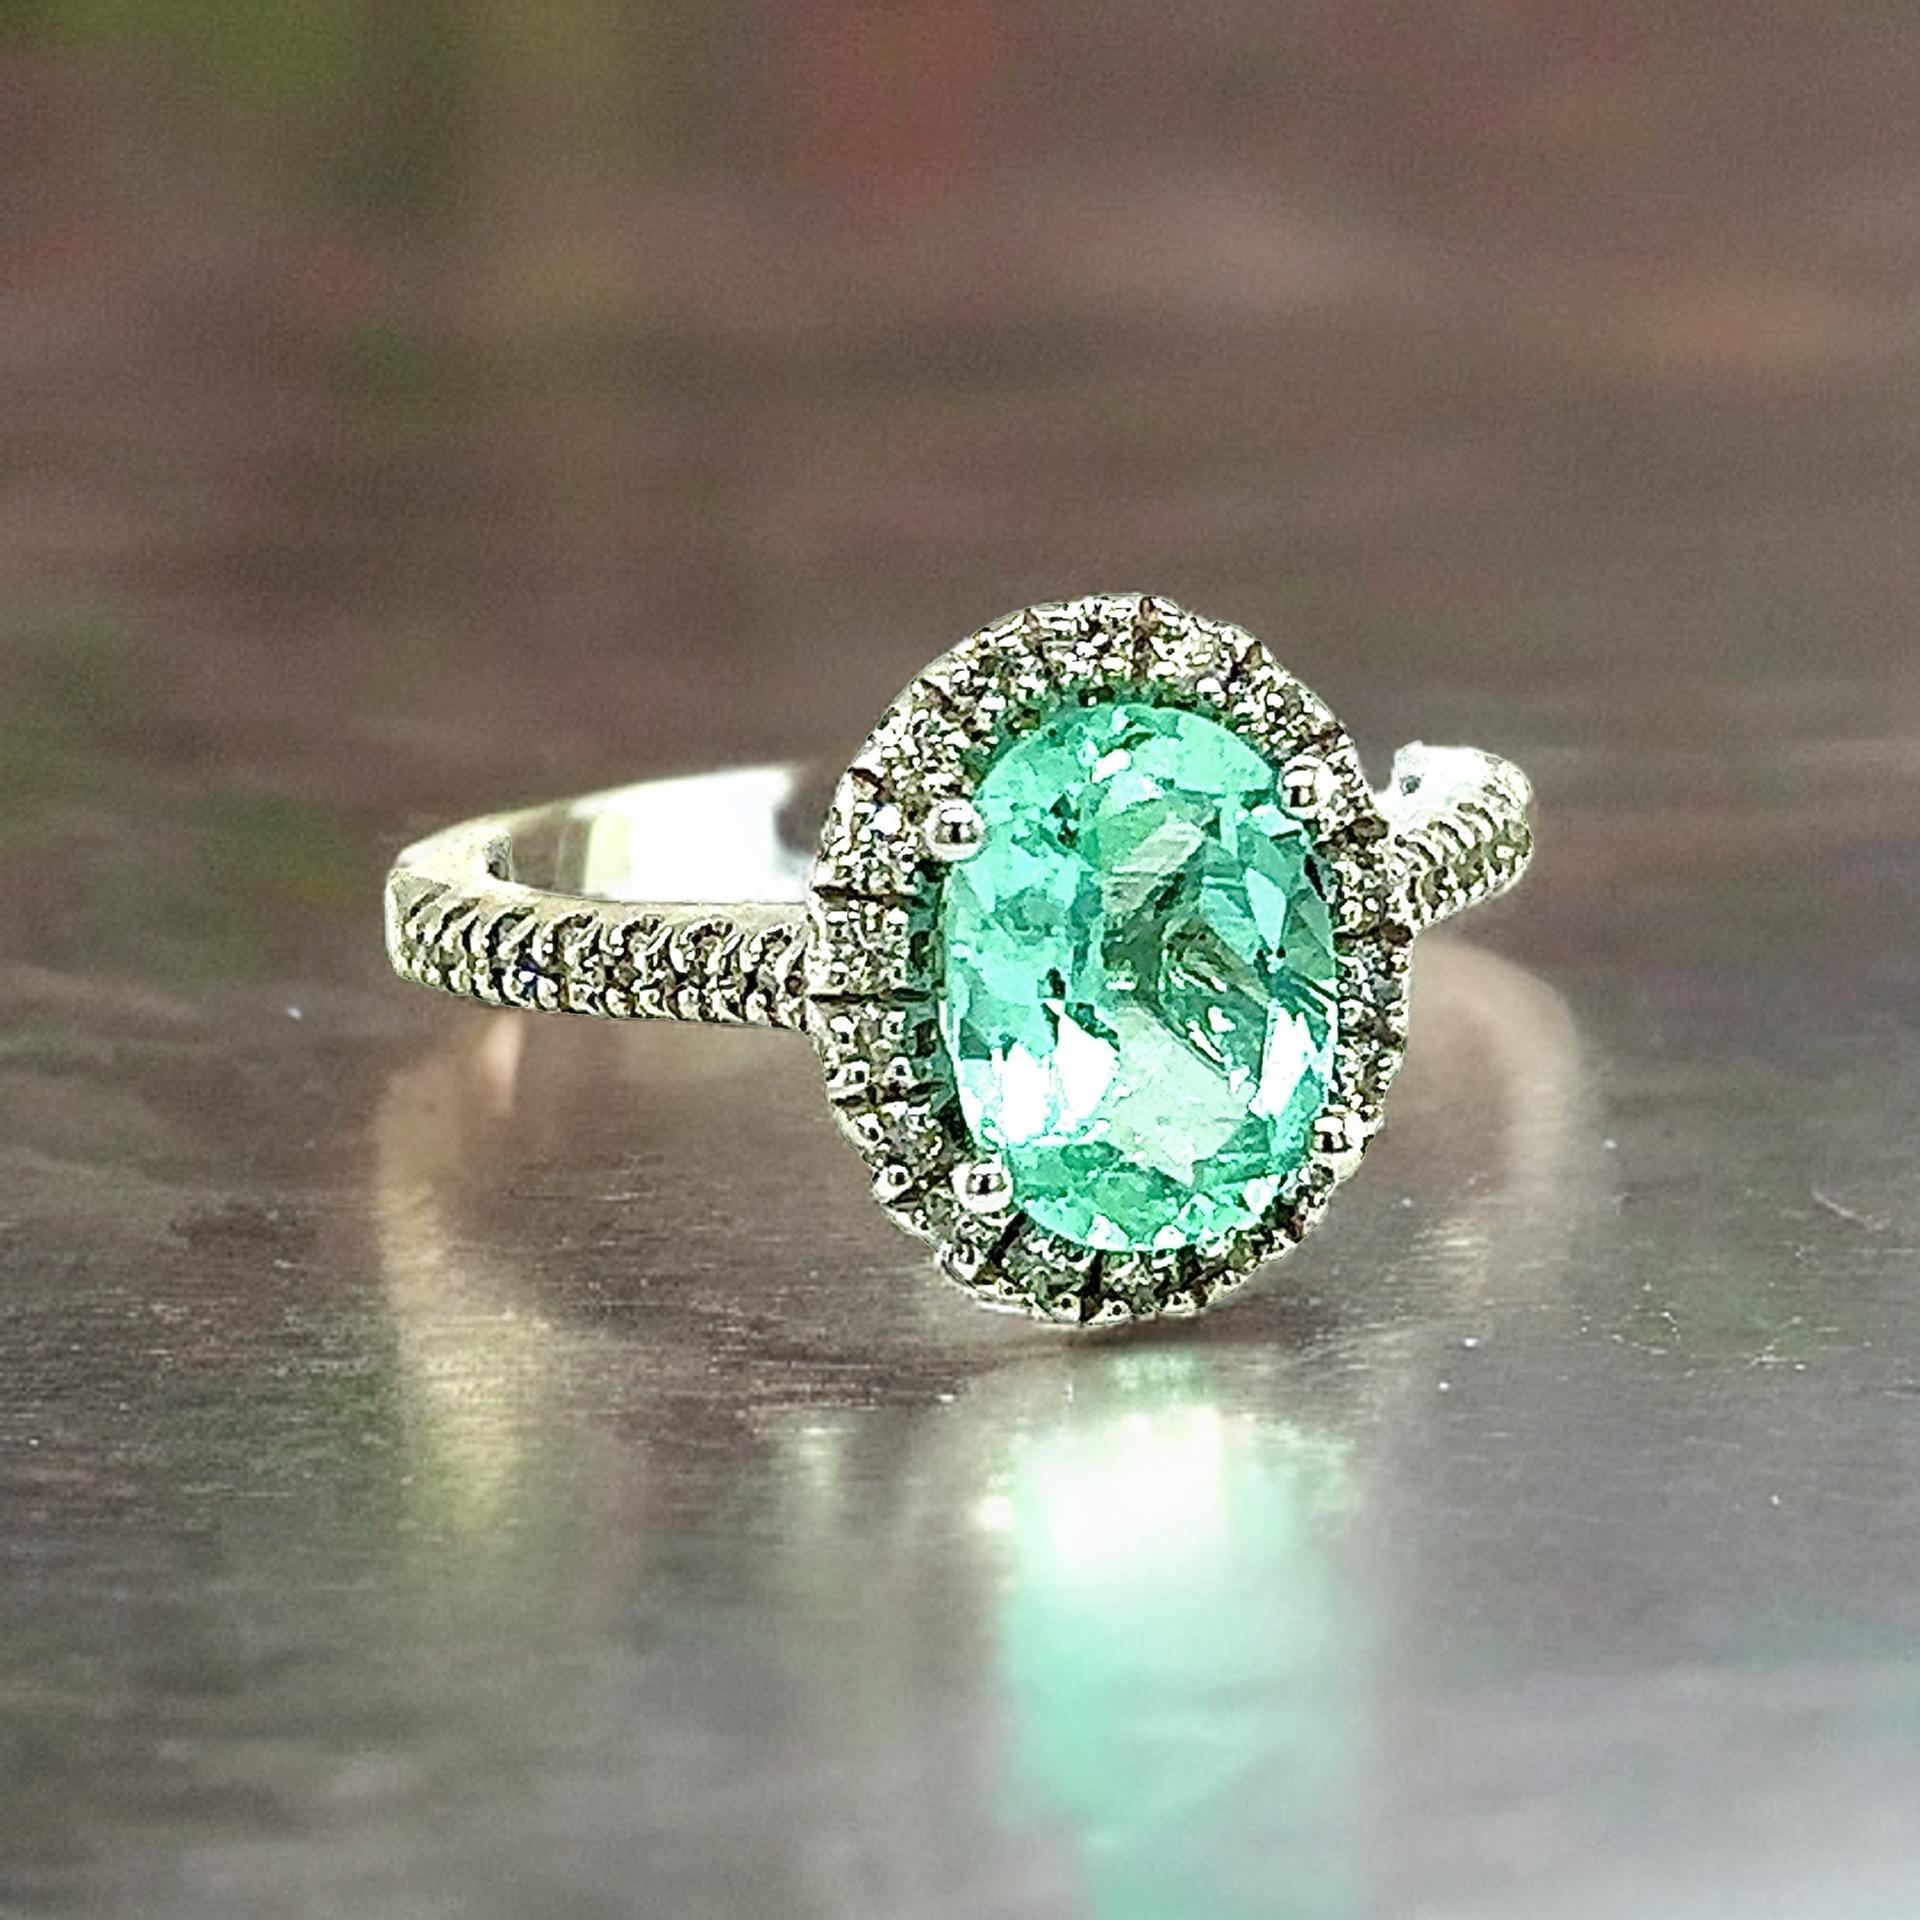 Women's or Men's Natural Colombian Emerald Diamond Ring Size 6.5 14k W Gold 2.98 TCW Certified For Sale